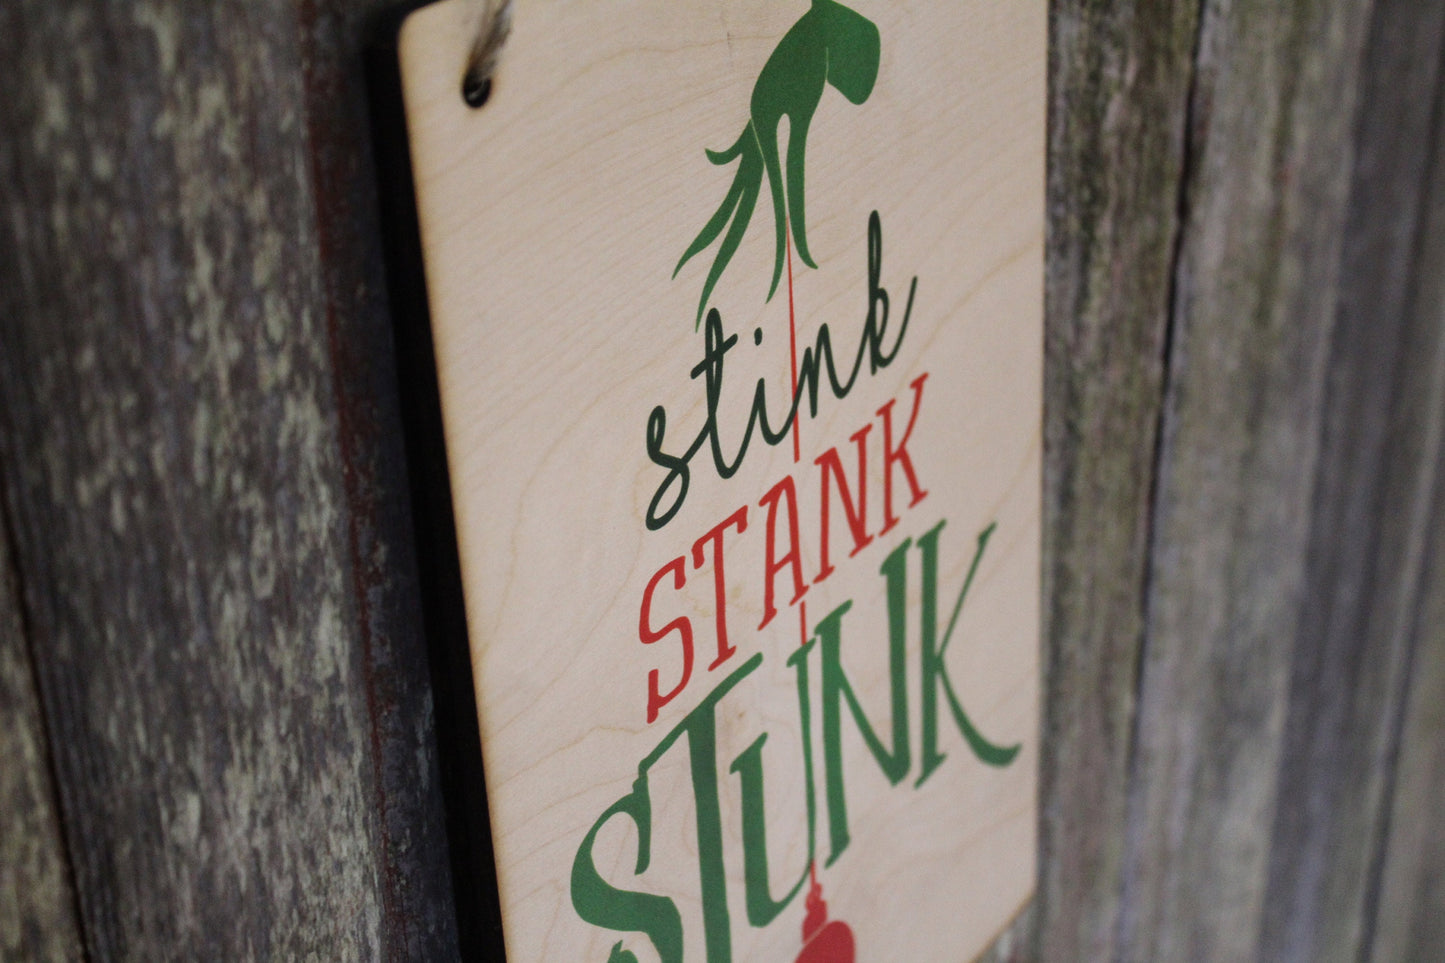 Stink Stank Stunk Sign Wall Mean One Décor Christmas Tree Wood Print Entry Way Front Door Decoration Winter Ornament Green Hand